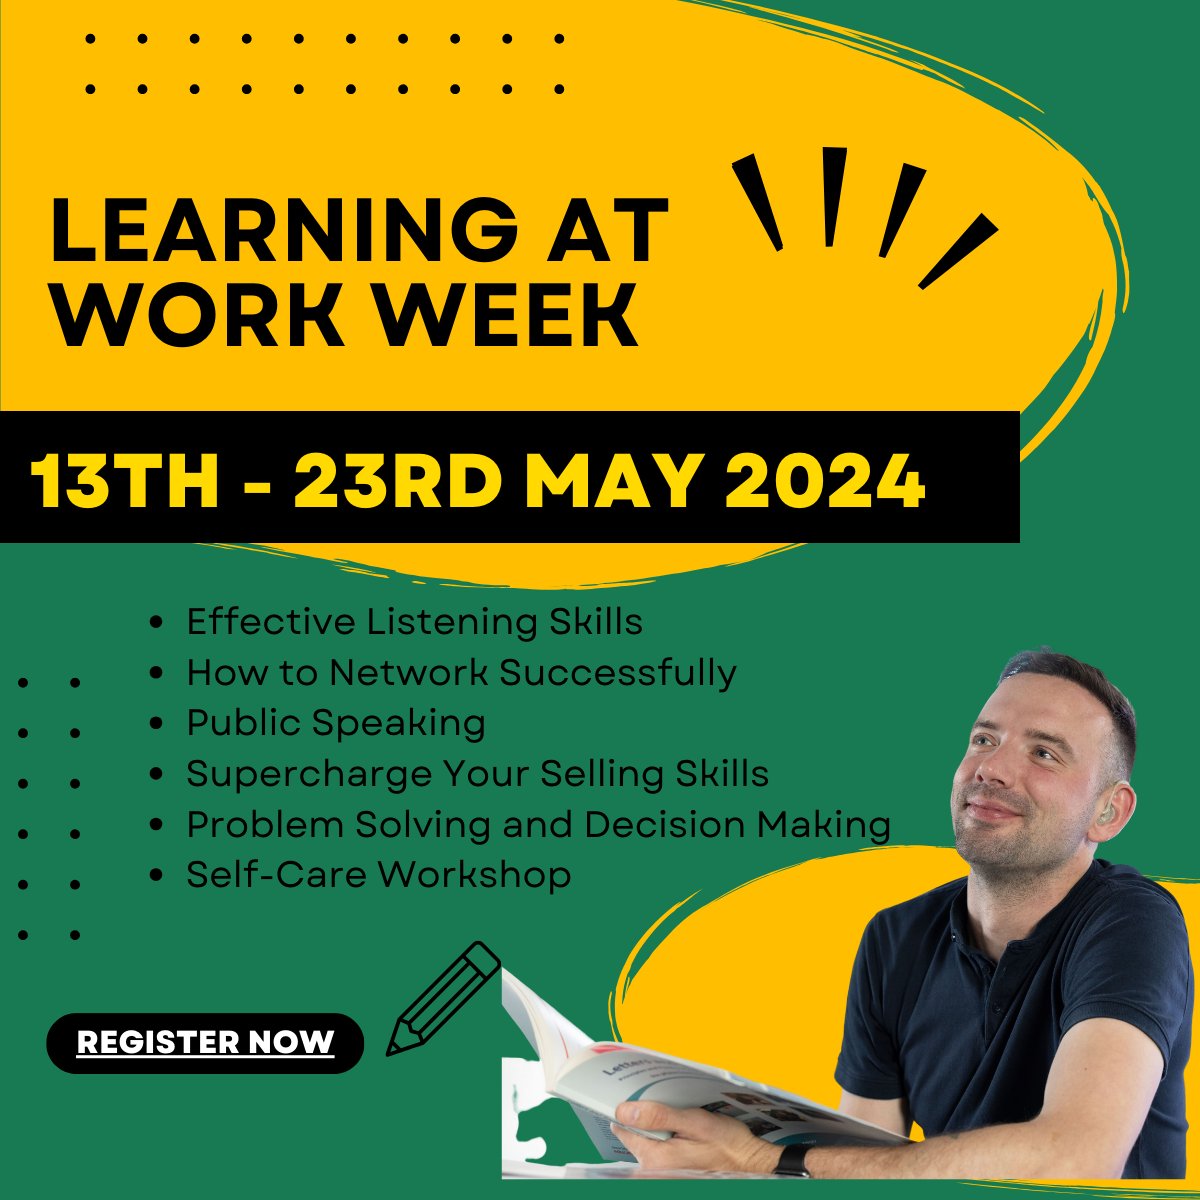 #LearningatWorkWeek - a series of motivational workshops. This year’s theme is “Learning Power” so harness your #learningpower to #refresh skills or discover new ones and uncover your potential. Find out more ⬇⬇ wandsworthlifelonglearning.org.uk/guide/learning…